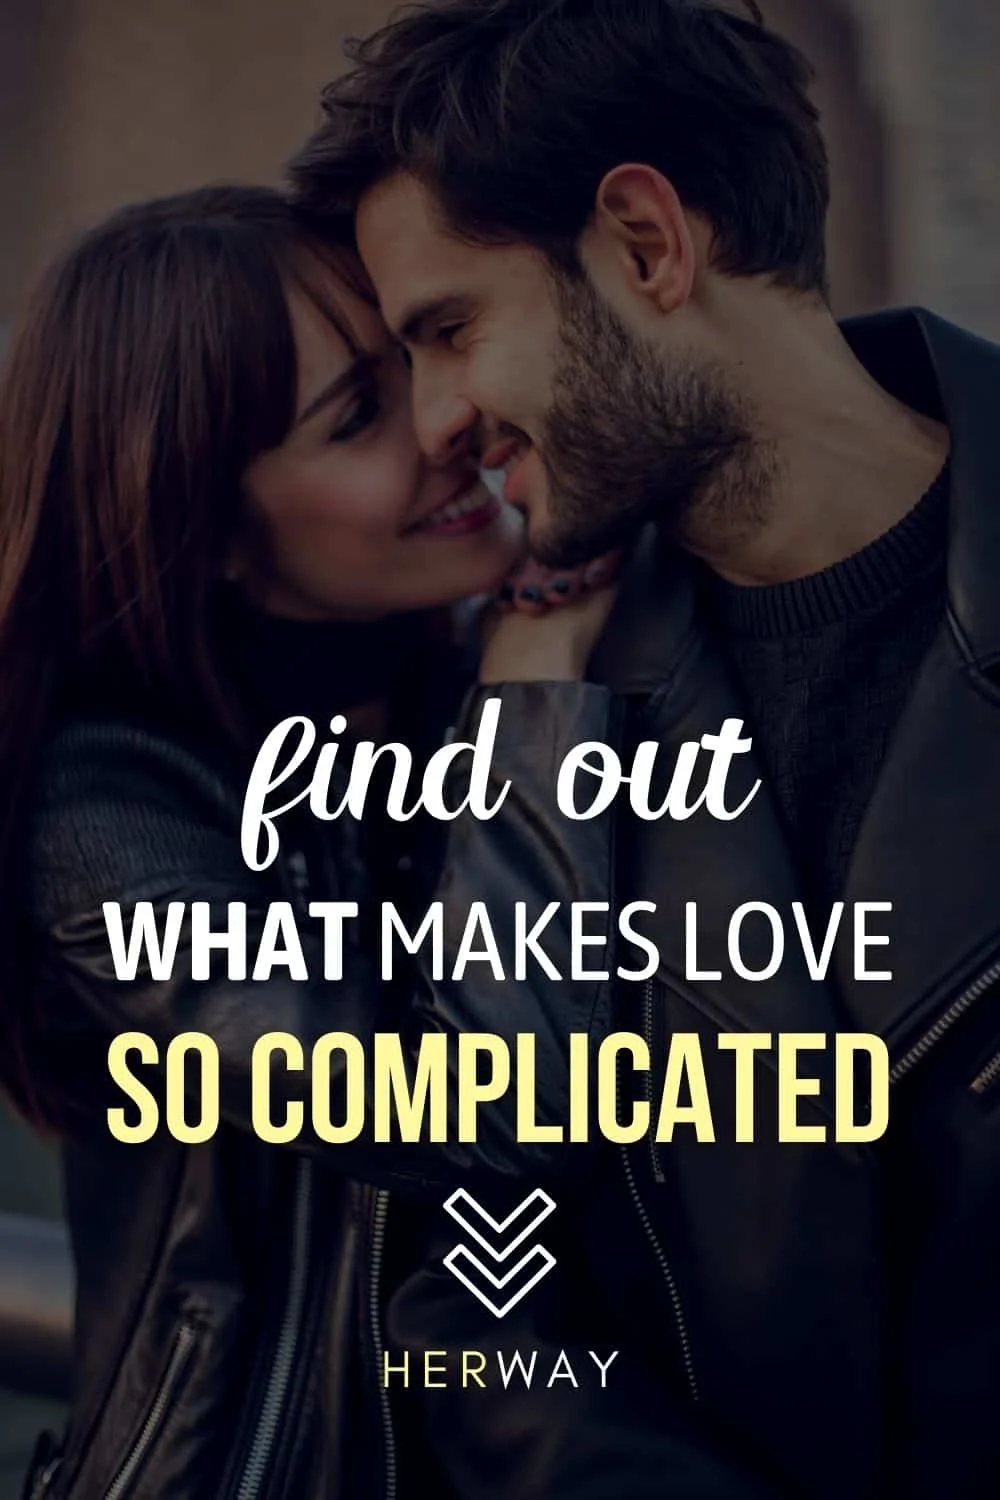 complicated definition of love